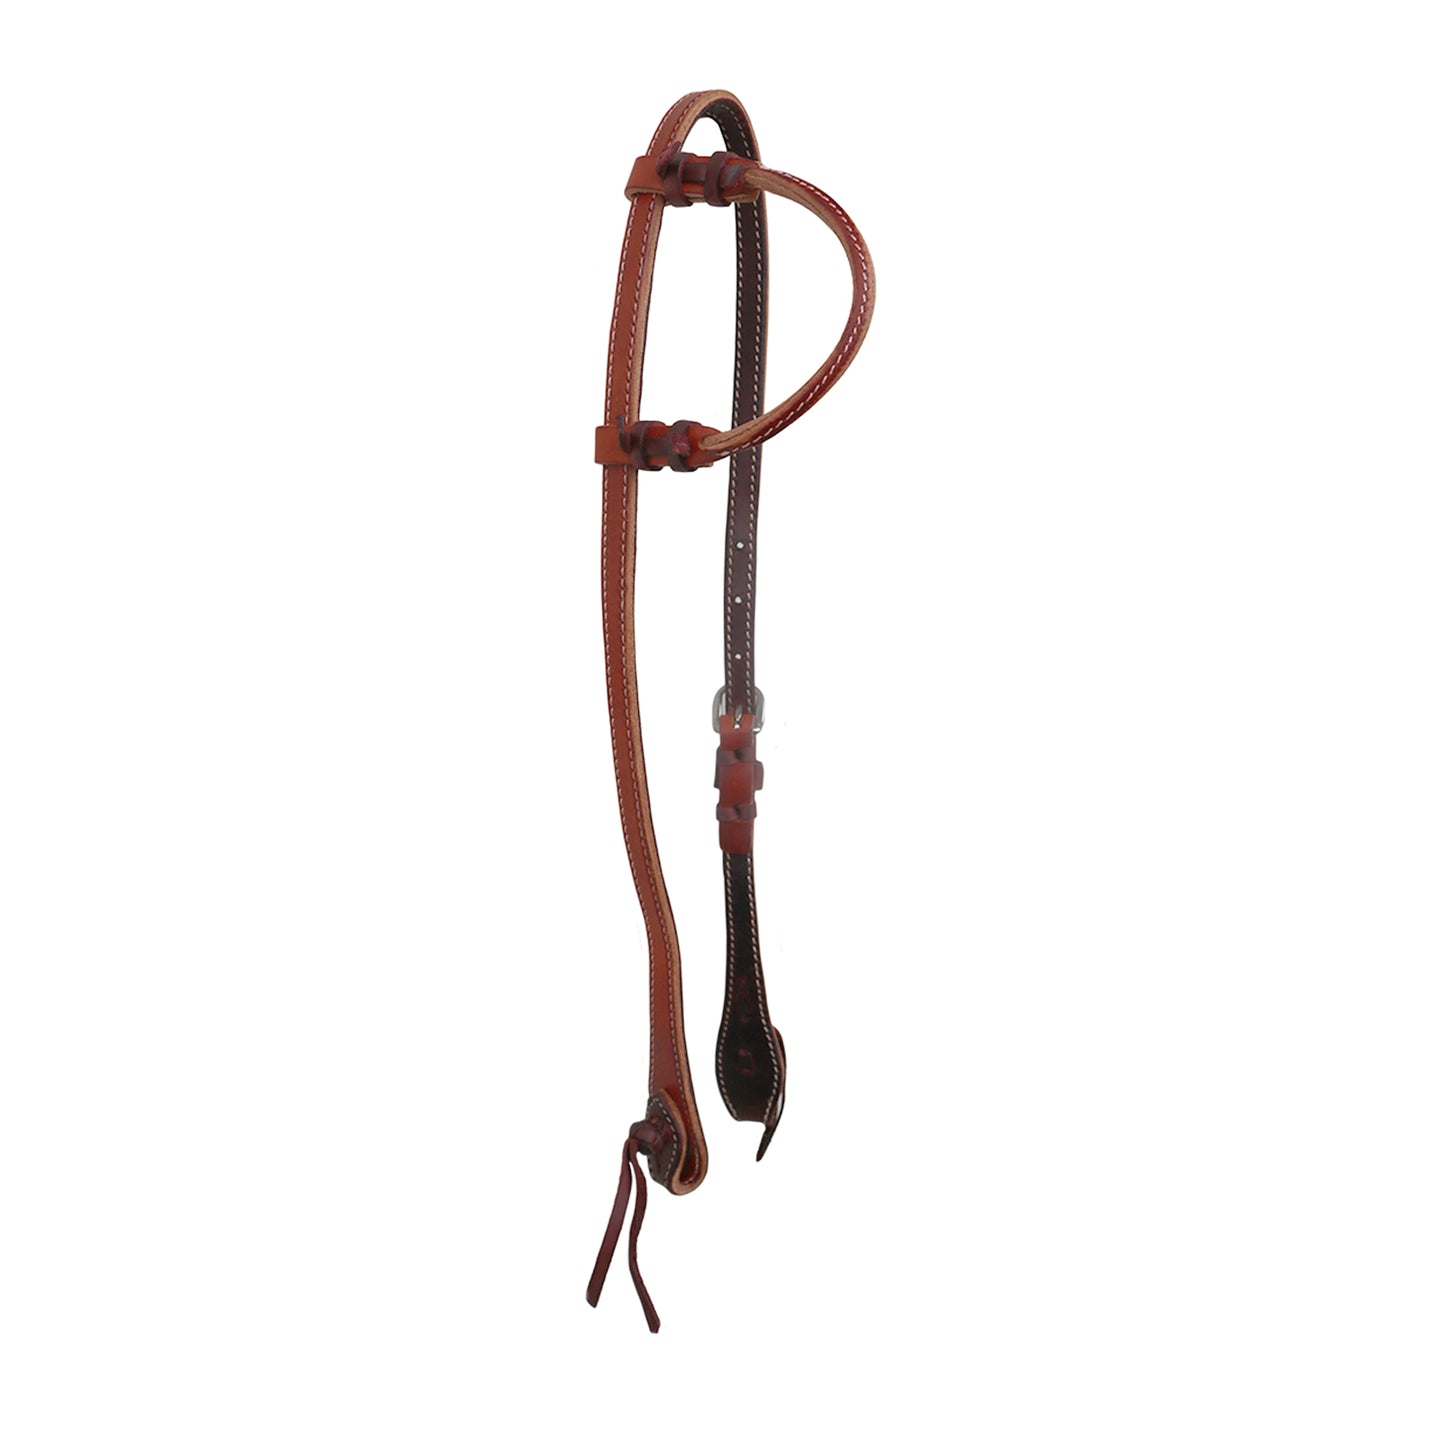 Elite round one ear headstall harness leather single cheek adjustable with pineapple knot.